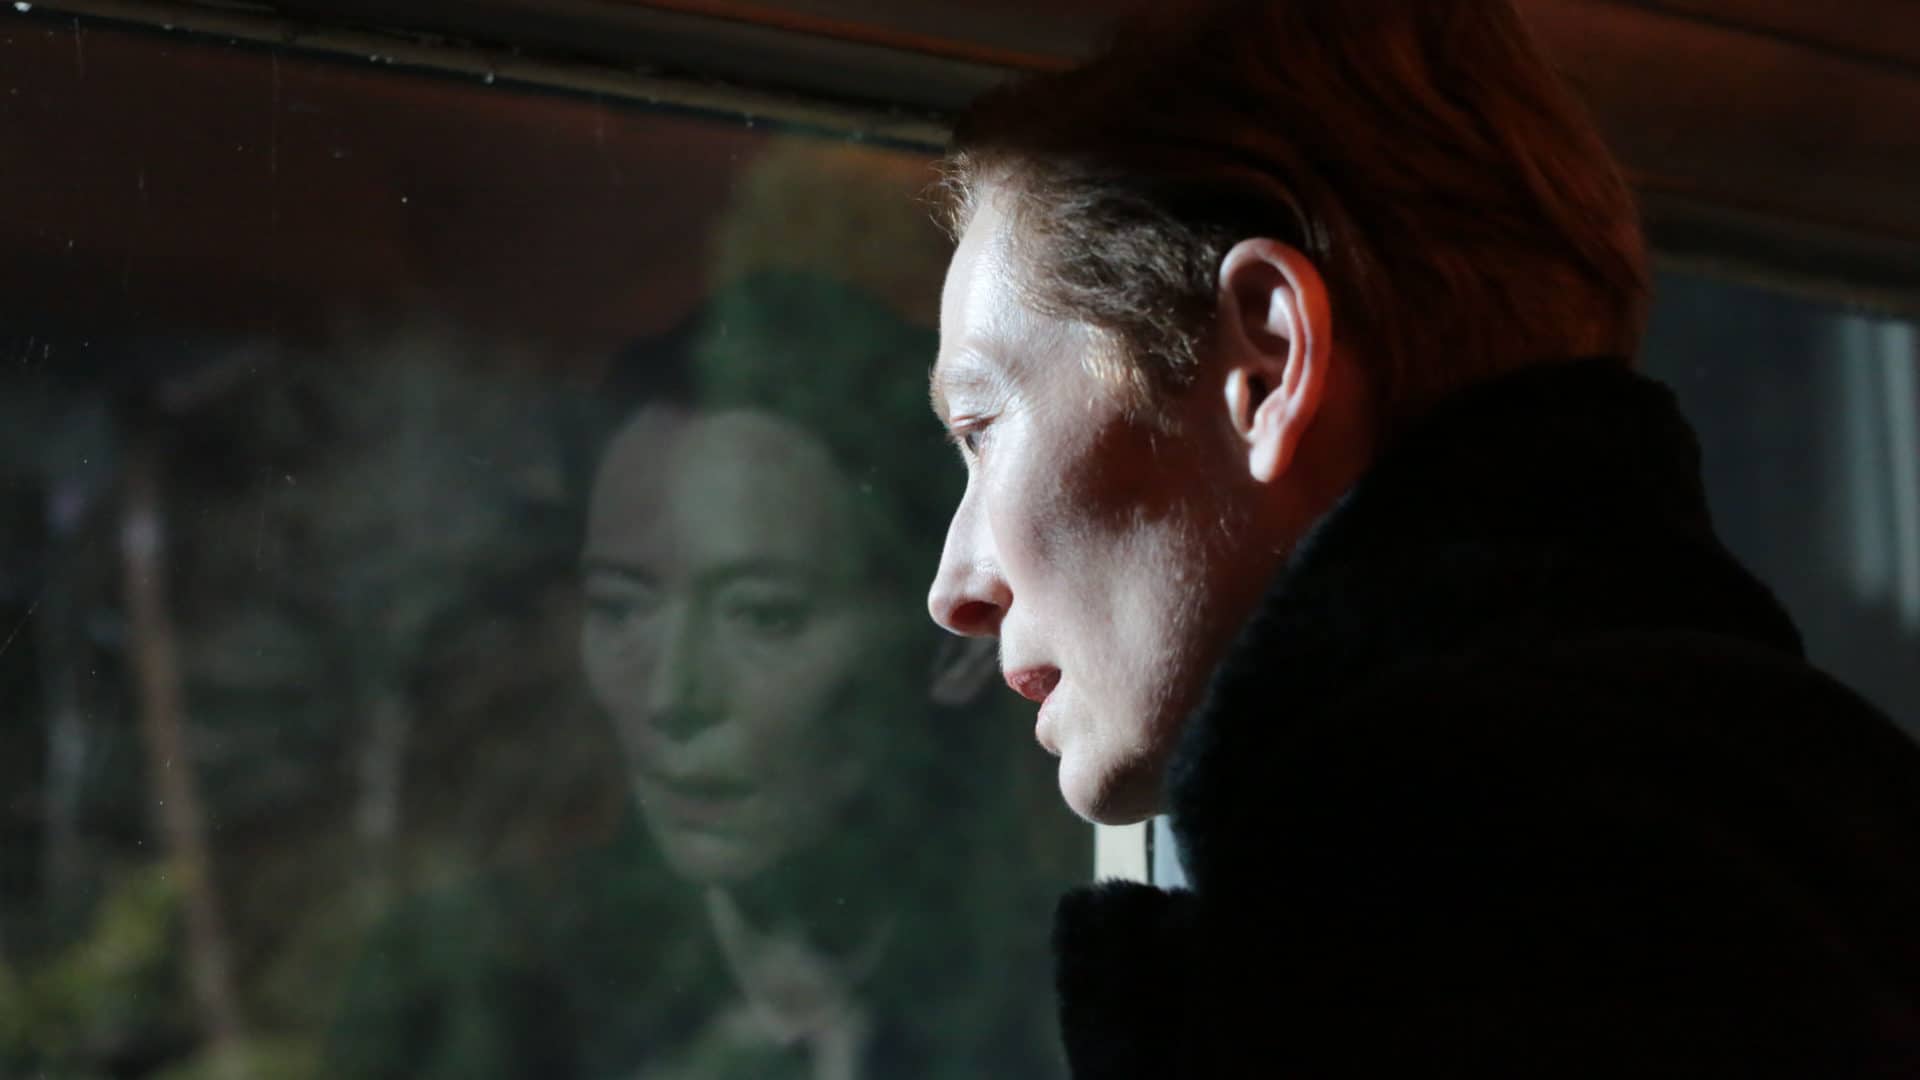 Tilda Swinton plays both mother and daughter in The Eternal Daughter, a ghost story set in a haunted hotel ornamented by gables, gargoyles and all the trappings.